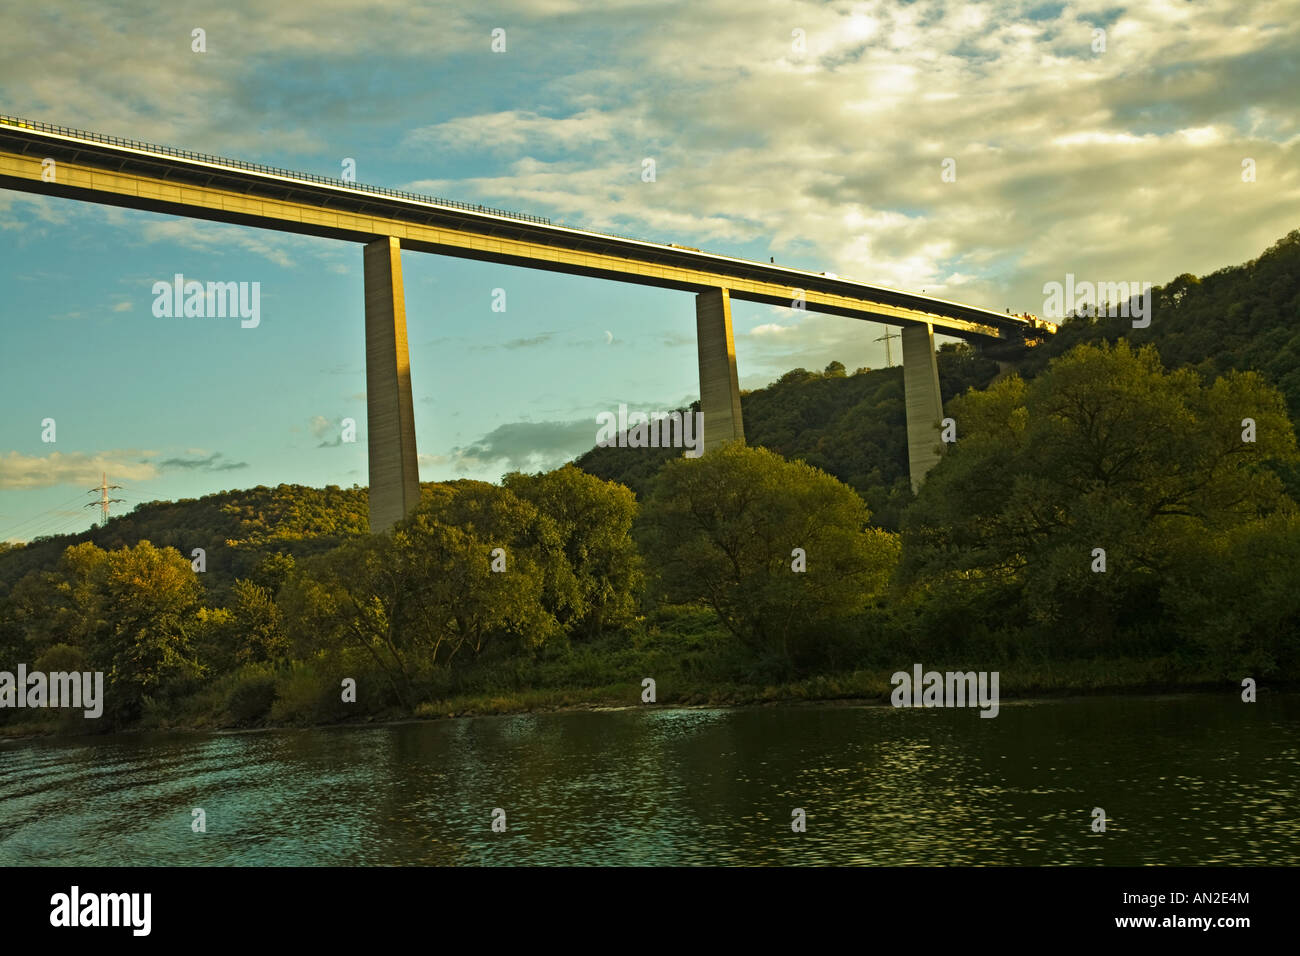 MOSELLE CROSSING OF A61-E31 HIGH ROAD BRIDGE IN EVENING LIGHT FROM BELOW Stock Photo